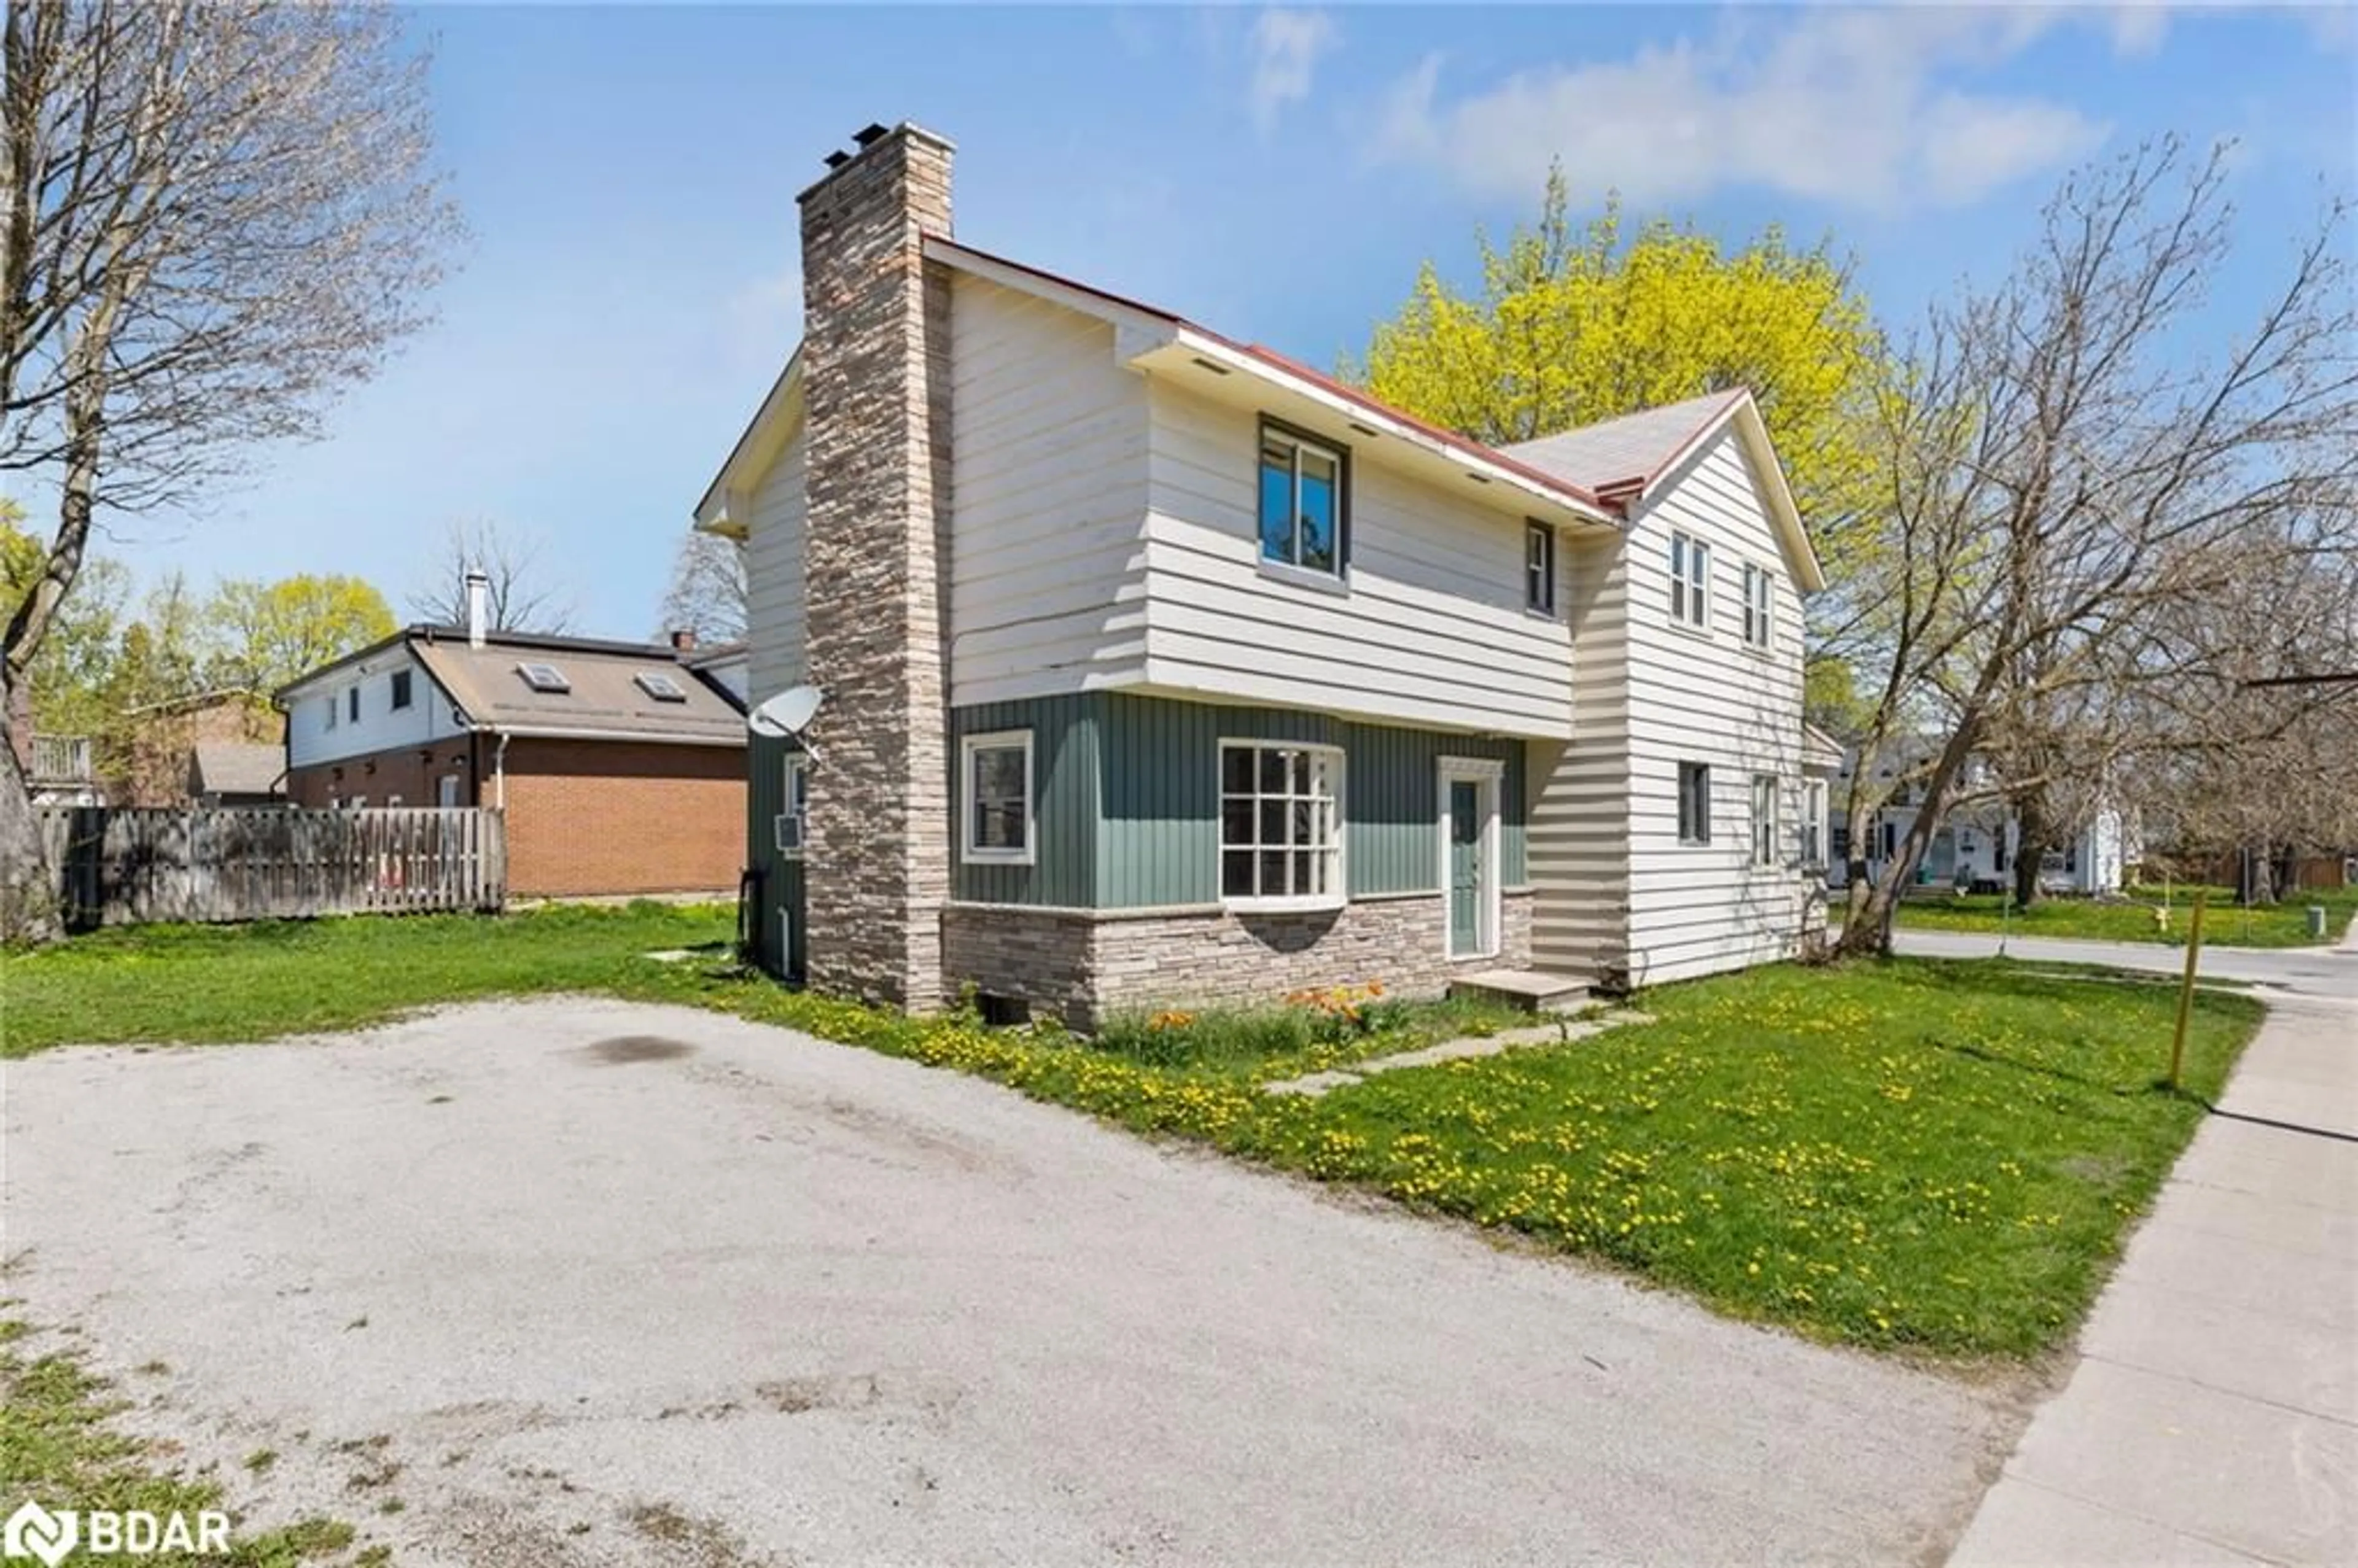 Frontside or backside of a home for 138 Peel St, Barrie Ontario L4M 3L6